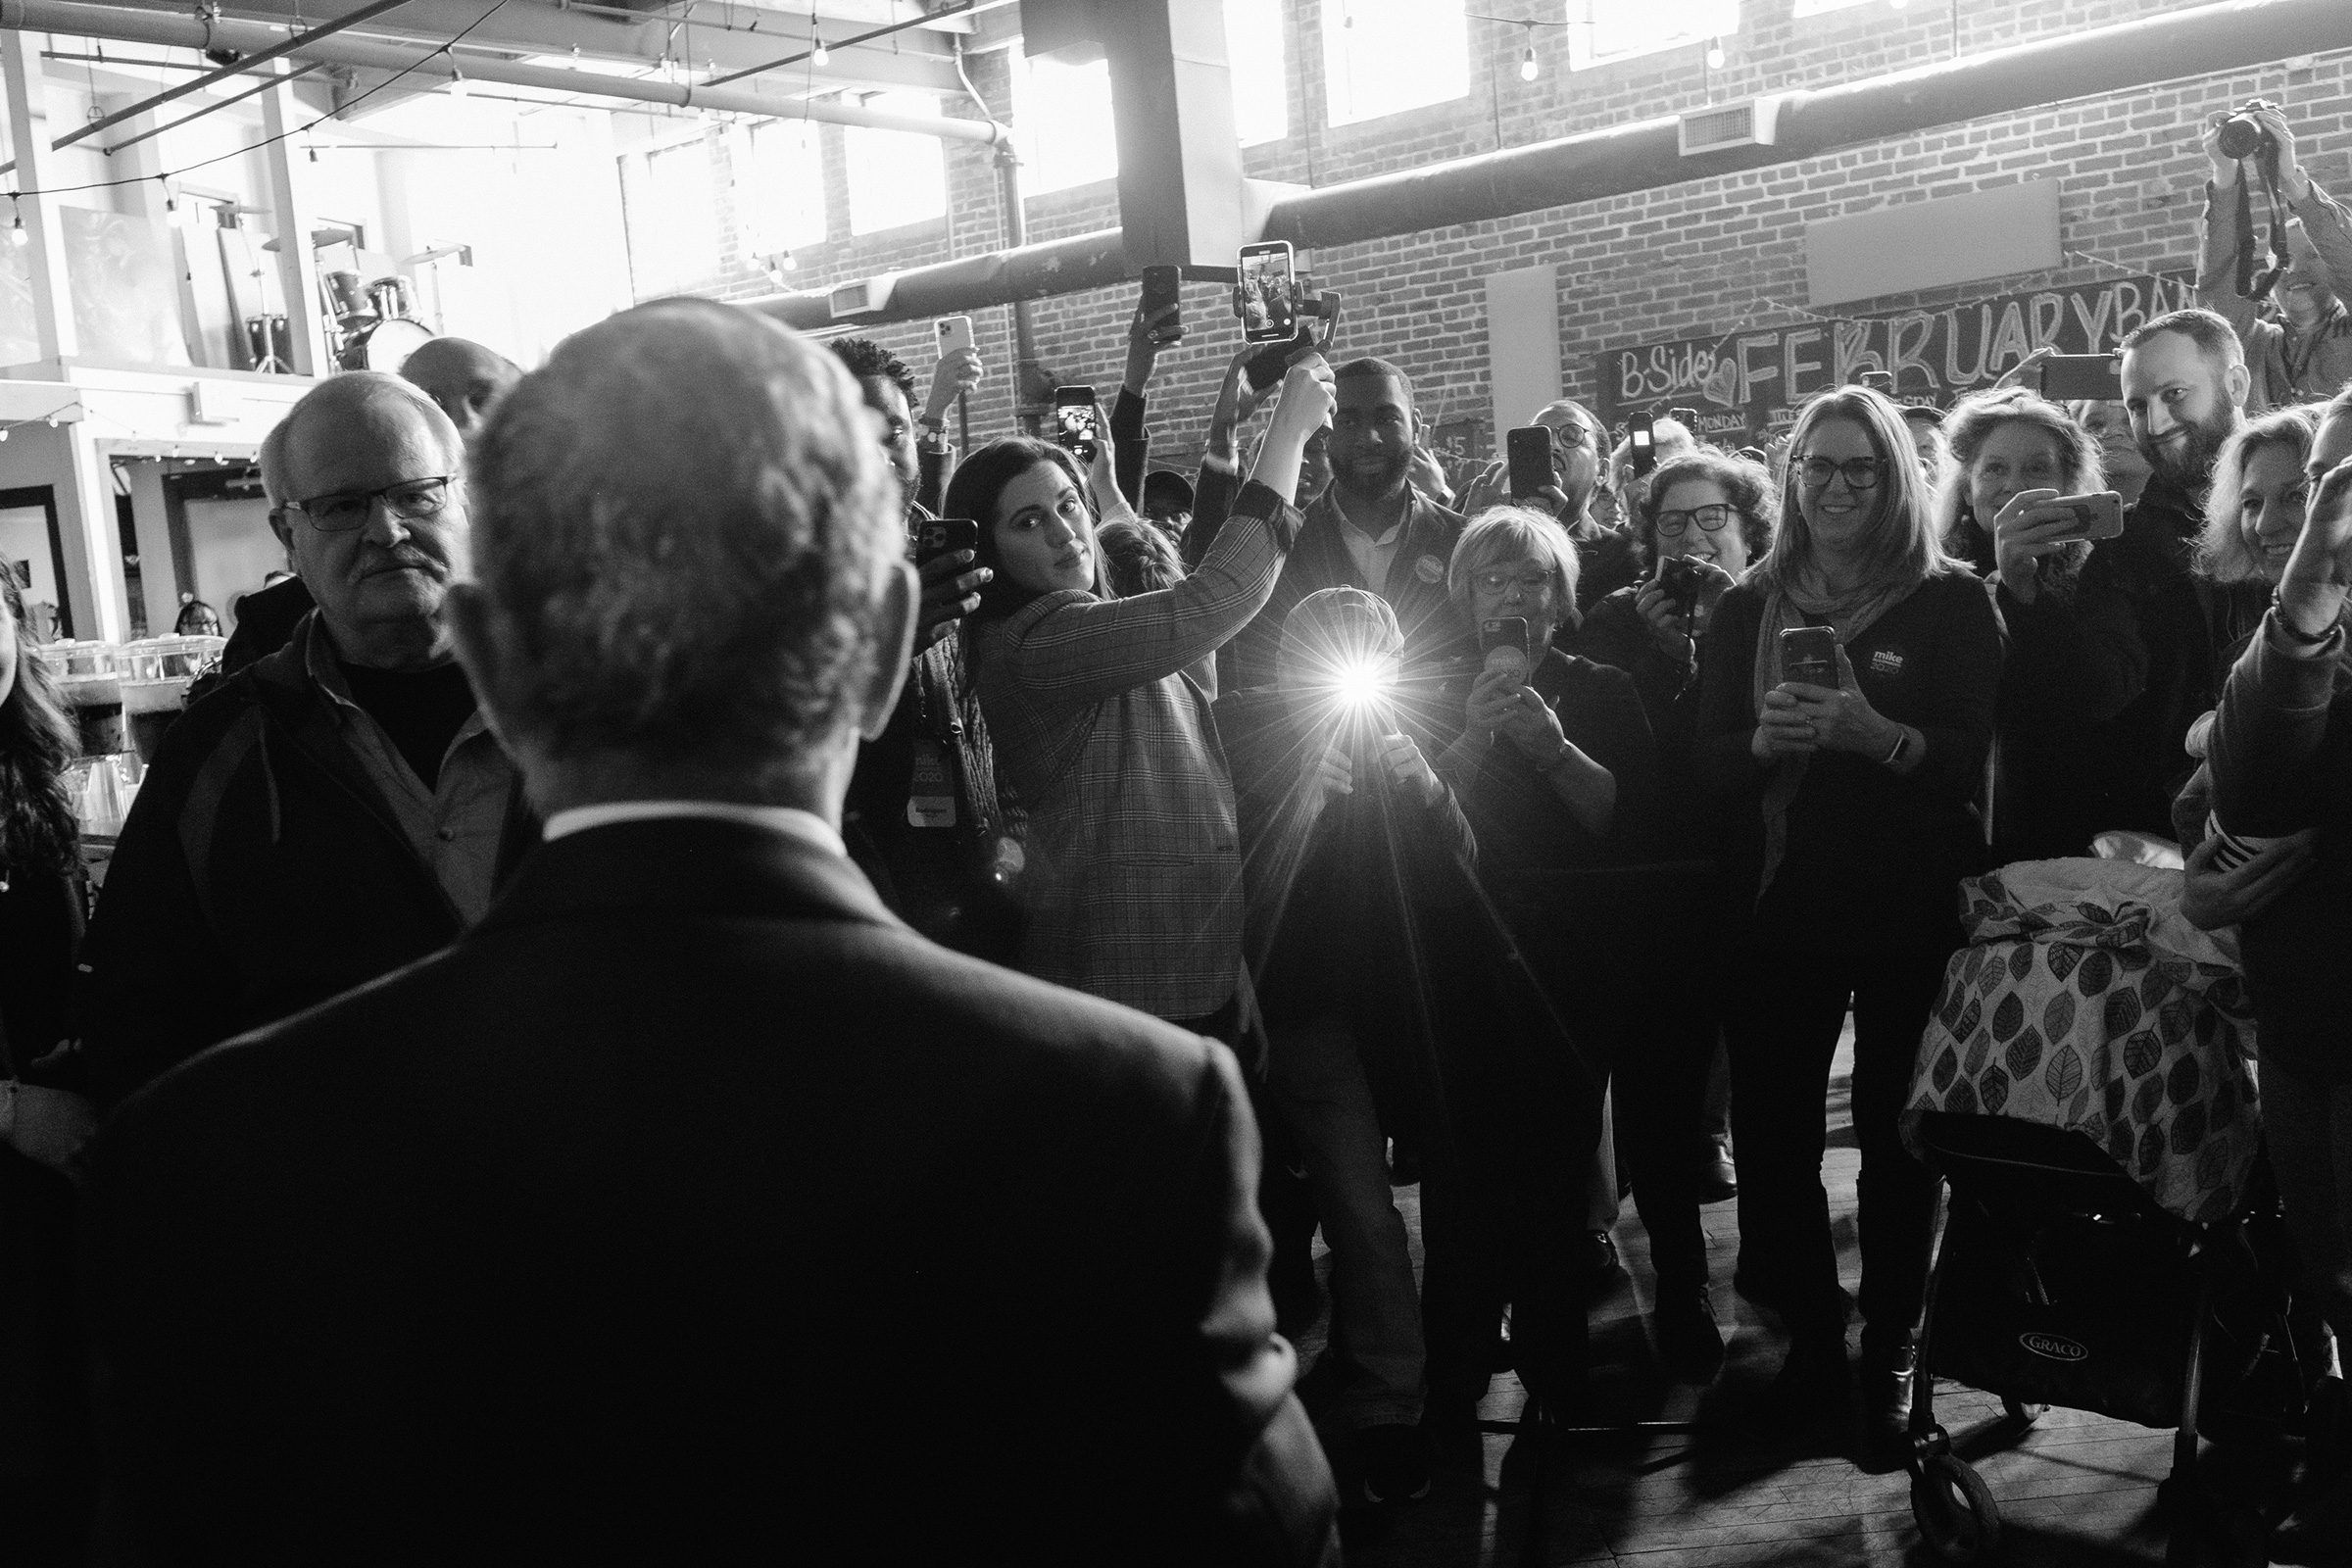 Memphis, Tennessee - February 28, 2020: Former New York City Mayor and 2020 presidential candidate Mike Bloomberg is seen speaking at a political rally in Memphis, Tennessee ahead of Super Tuesday primary voting in key states around the country on February 28, 2020. Photo: Christopher Lee for TIME